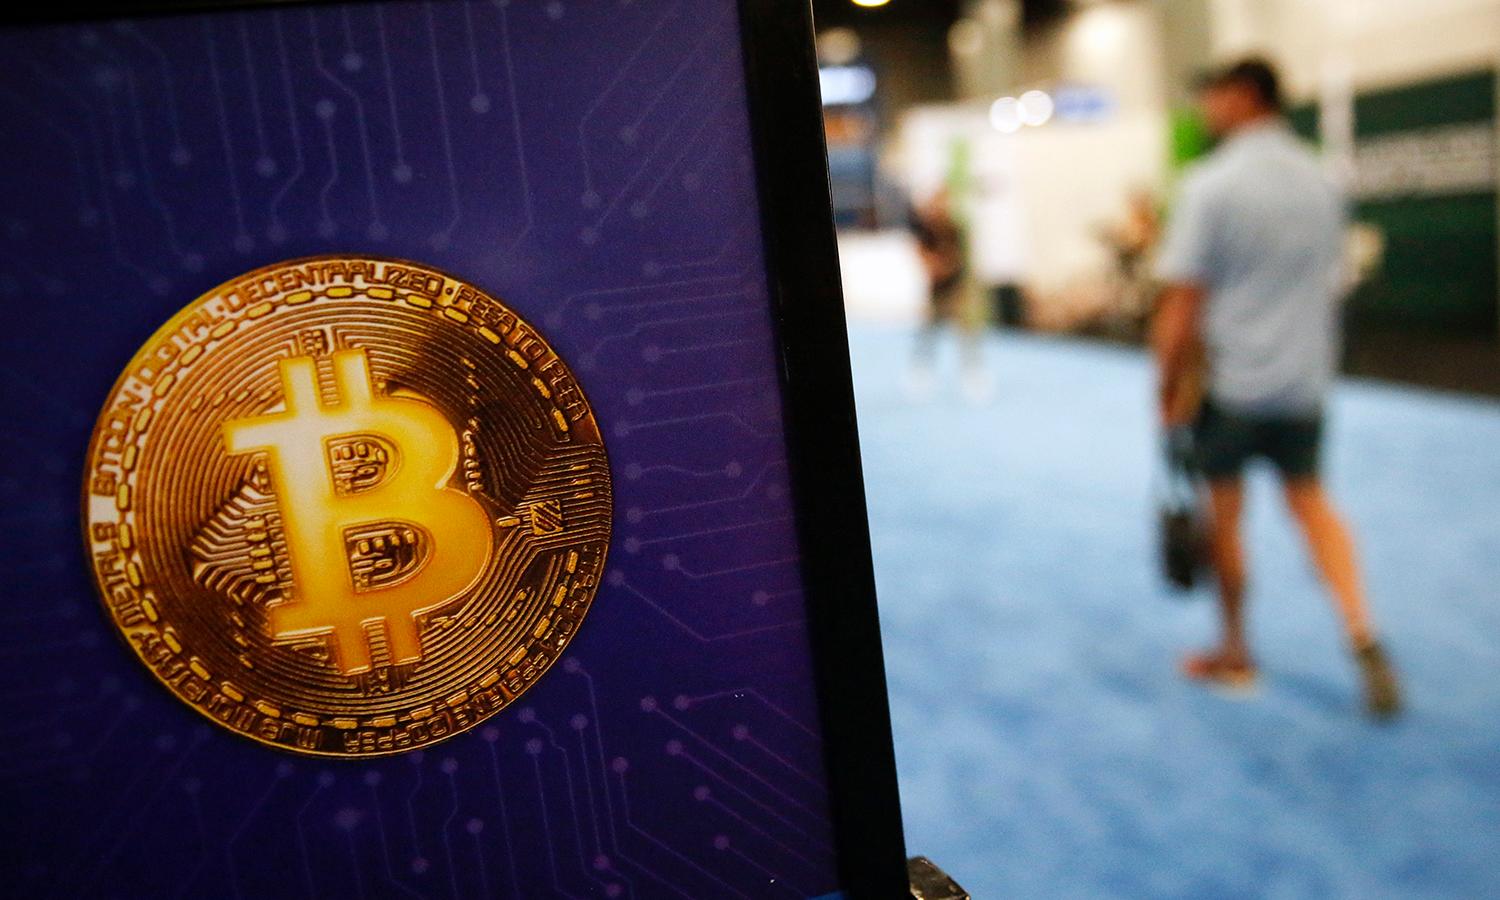 MIAMI, FLORIDA &#8211; APRIL 8: A bitcoin logo is seen during the Bitcoin 2022 Conference at Miami Beach Convention Center on April 8, 2022 in Miami, Florida. The worlds largest bitcoin conference runs from April 6-9, expecting over 30,000 people in attendance and over 7 million live stream viewers worldwide.(Photo by Marco Bello/Getty Images)